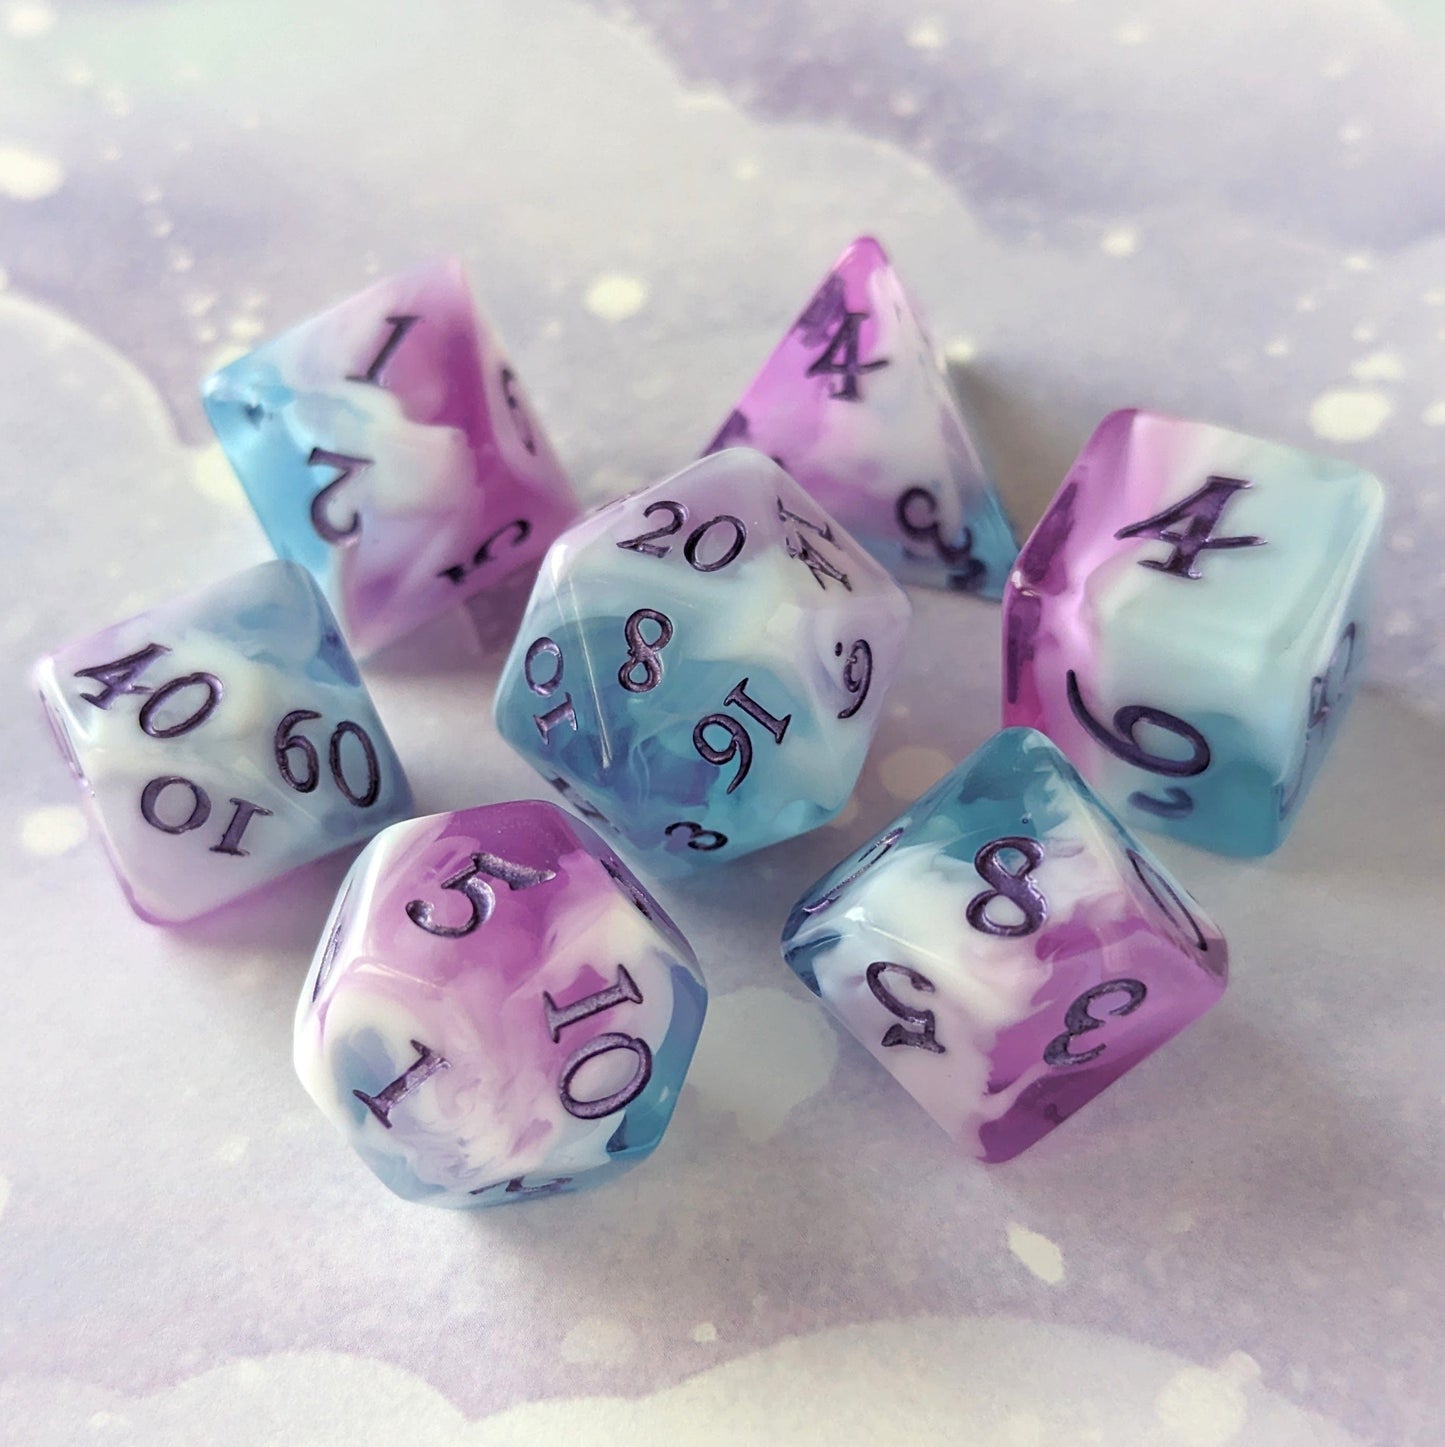 Vale of Dreams 7 and 11 Piece DnD Dice Set